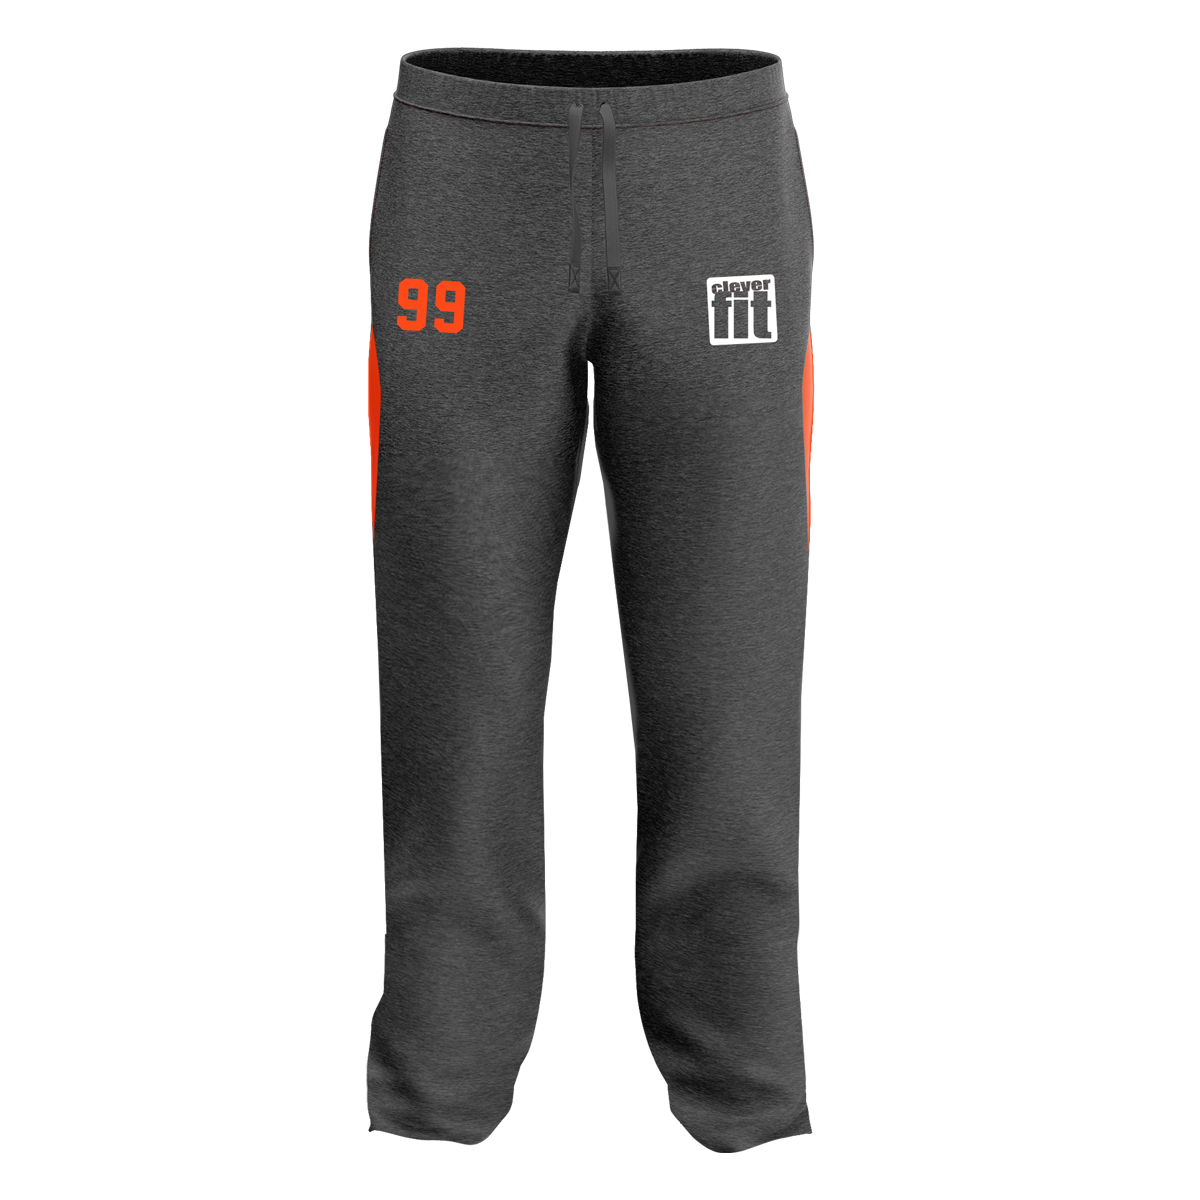 Foxes Signature Series Sweat Pant with Playernumber/Initials